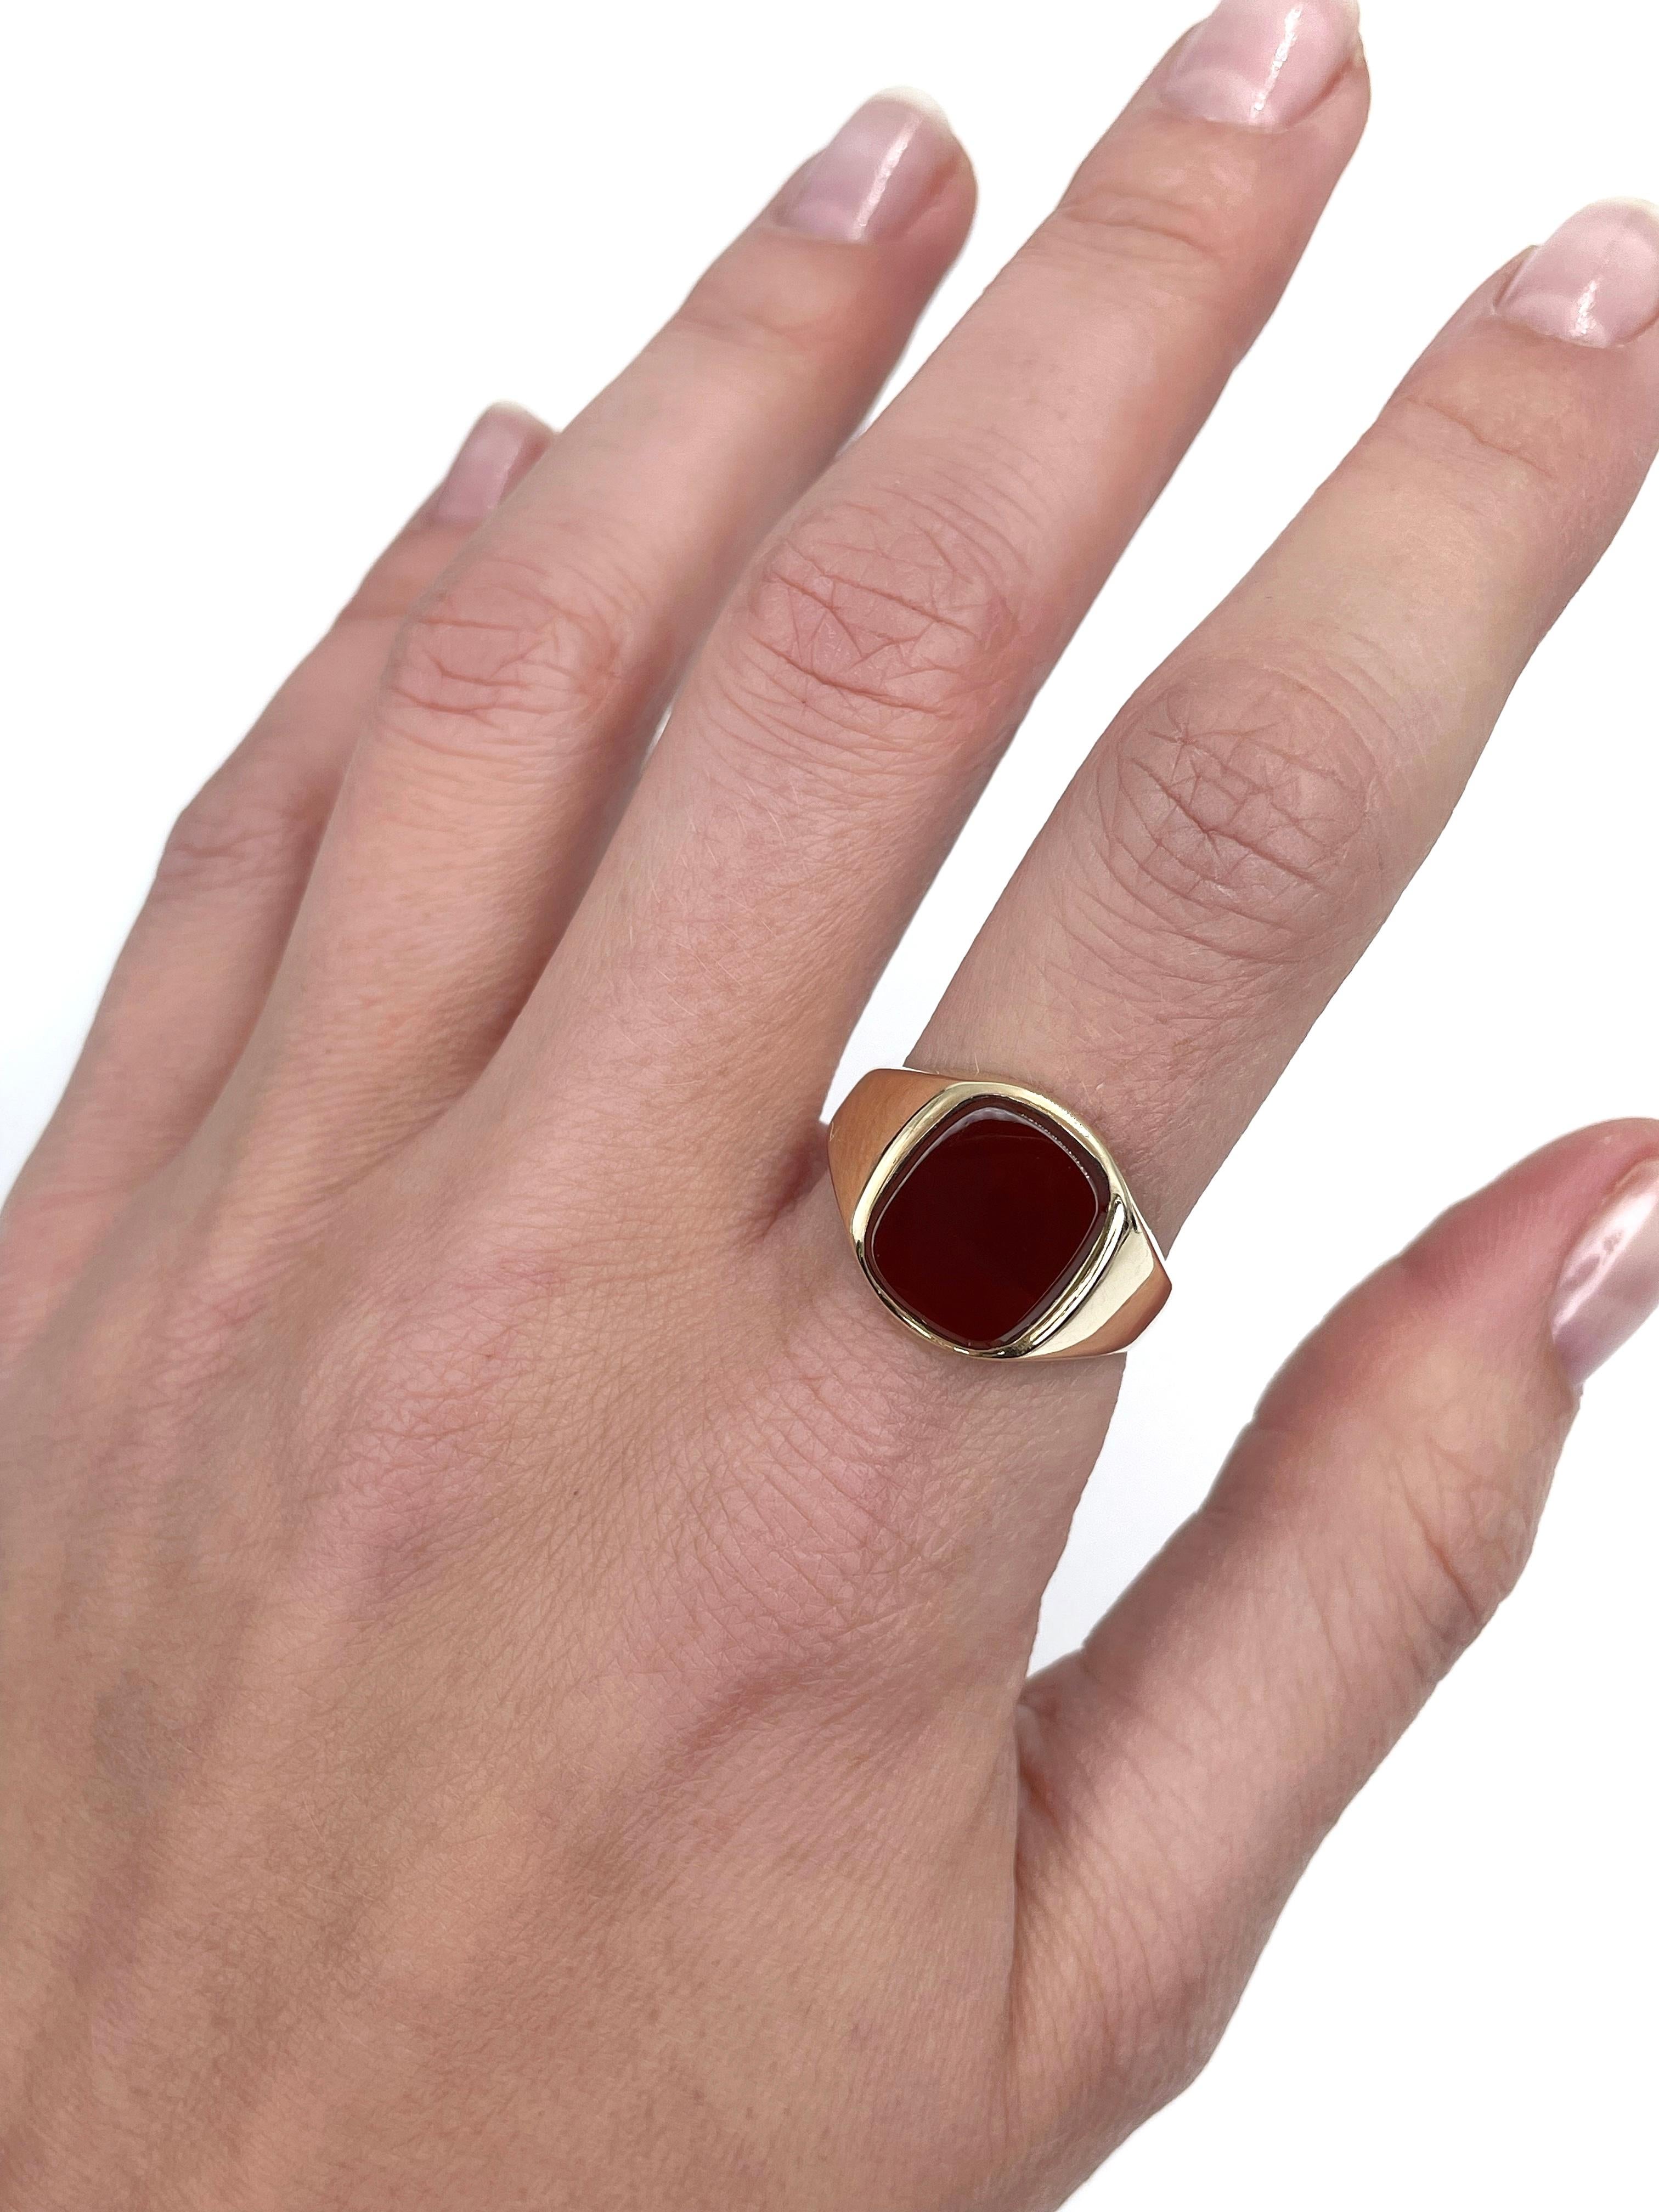 This is a vintage signet ring crafted in 14K yellow gold. The piece features rectangle shape carnelian. 

Circa 1970

Weight: 3.67g
Size: 20 (US10.25)

IMPORTANT: please ask about the possibility to resize before purchase. This process takes 2-7